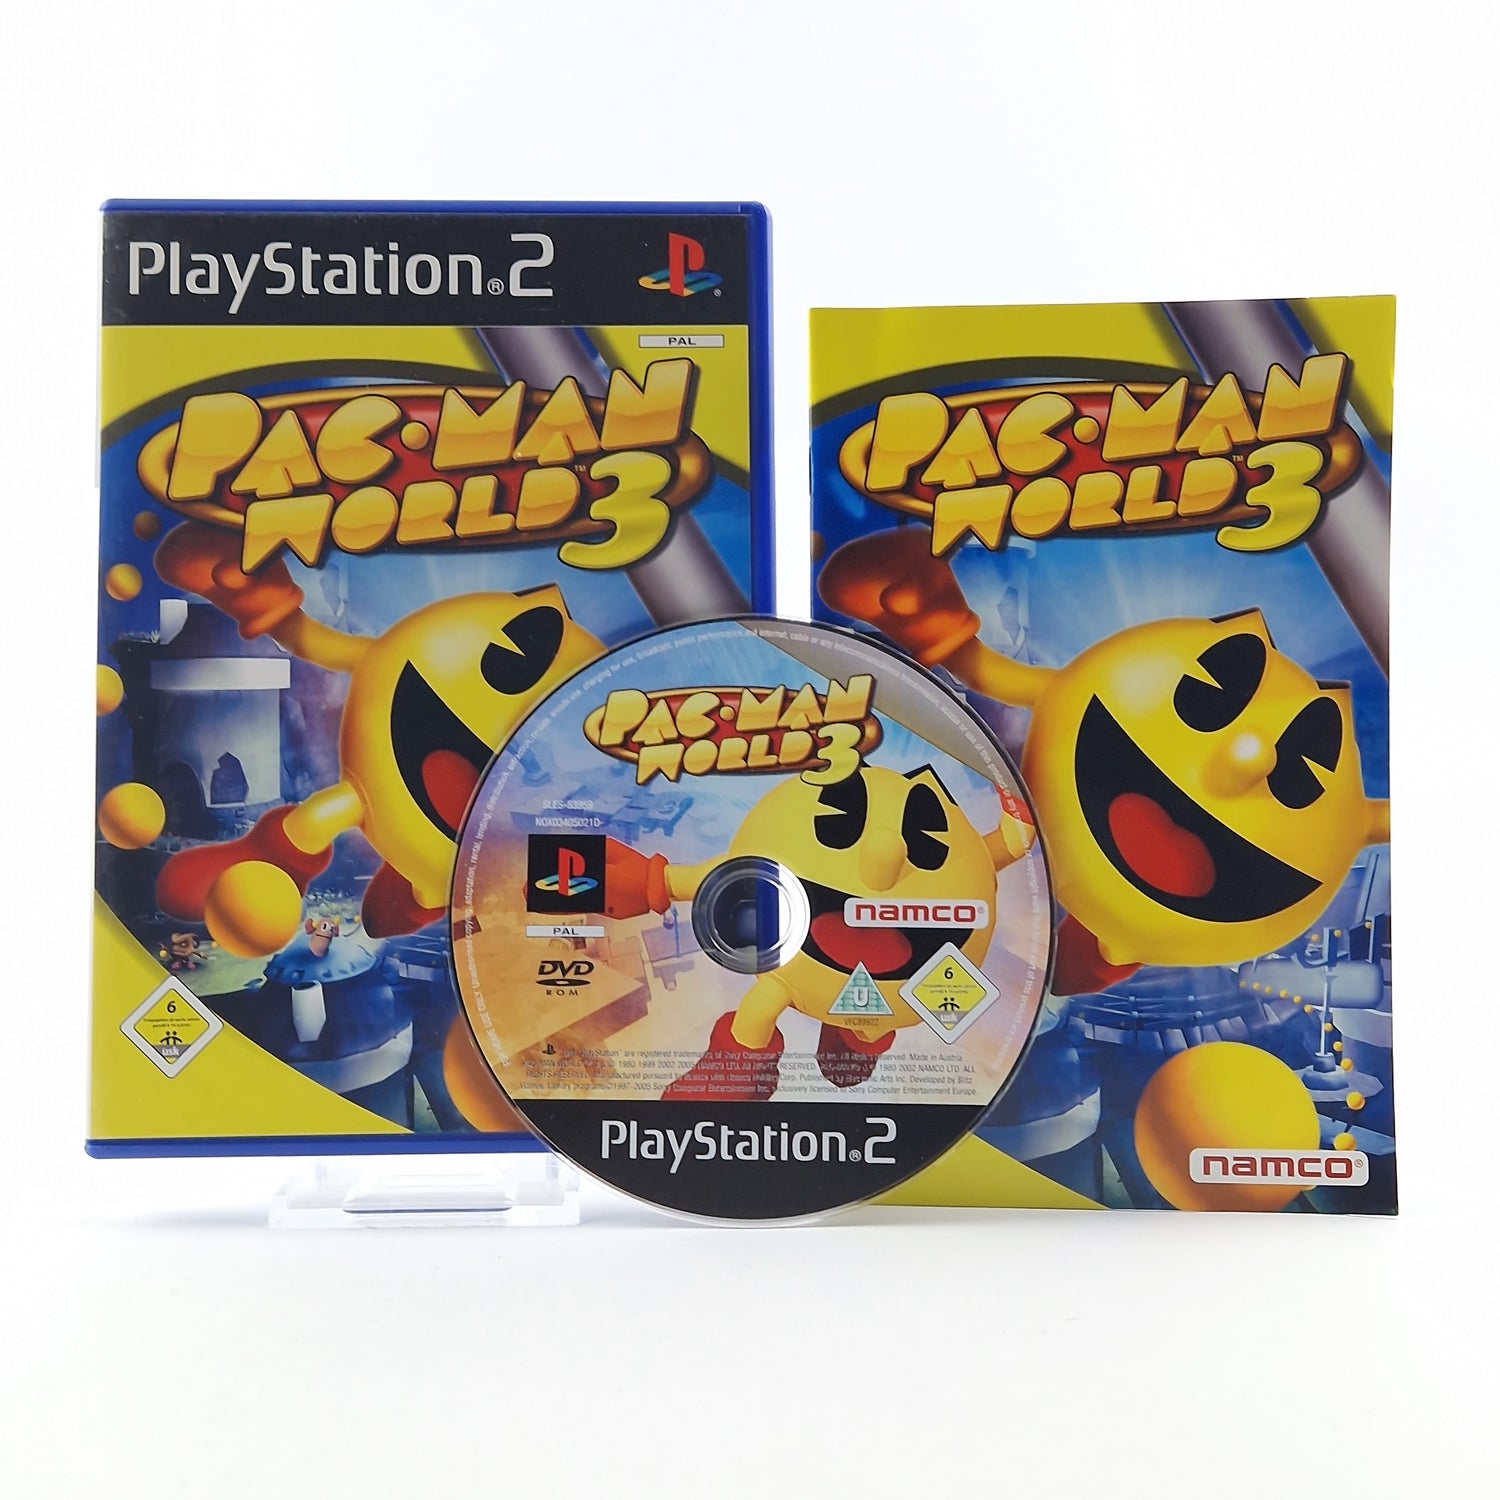 Playstation 2 game: Pac-Man World 3 - OVP instructions CD / SONY PS2 Game Pacman